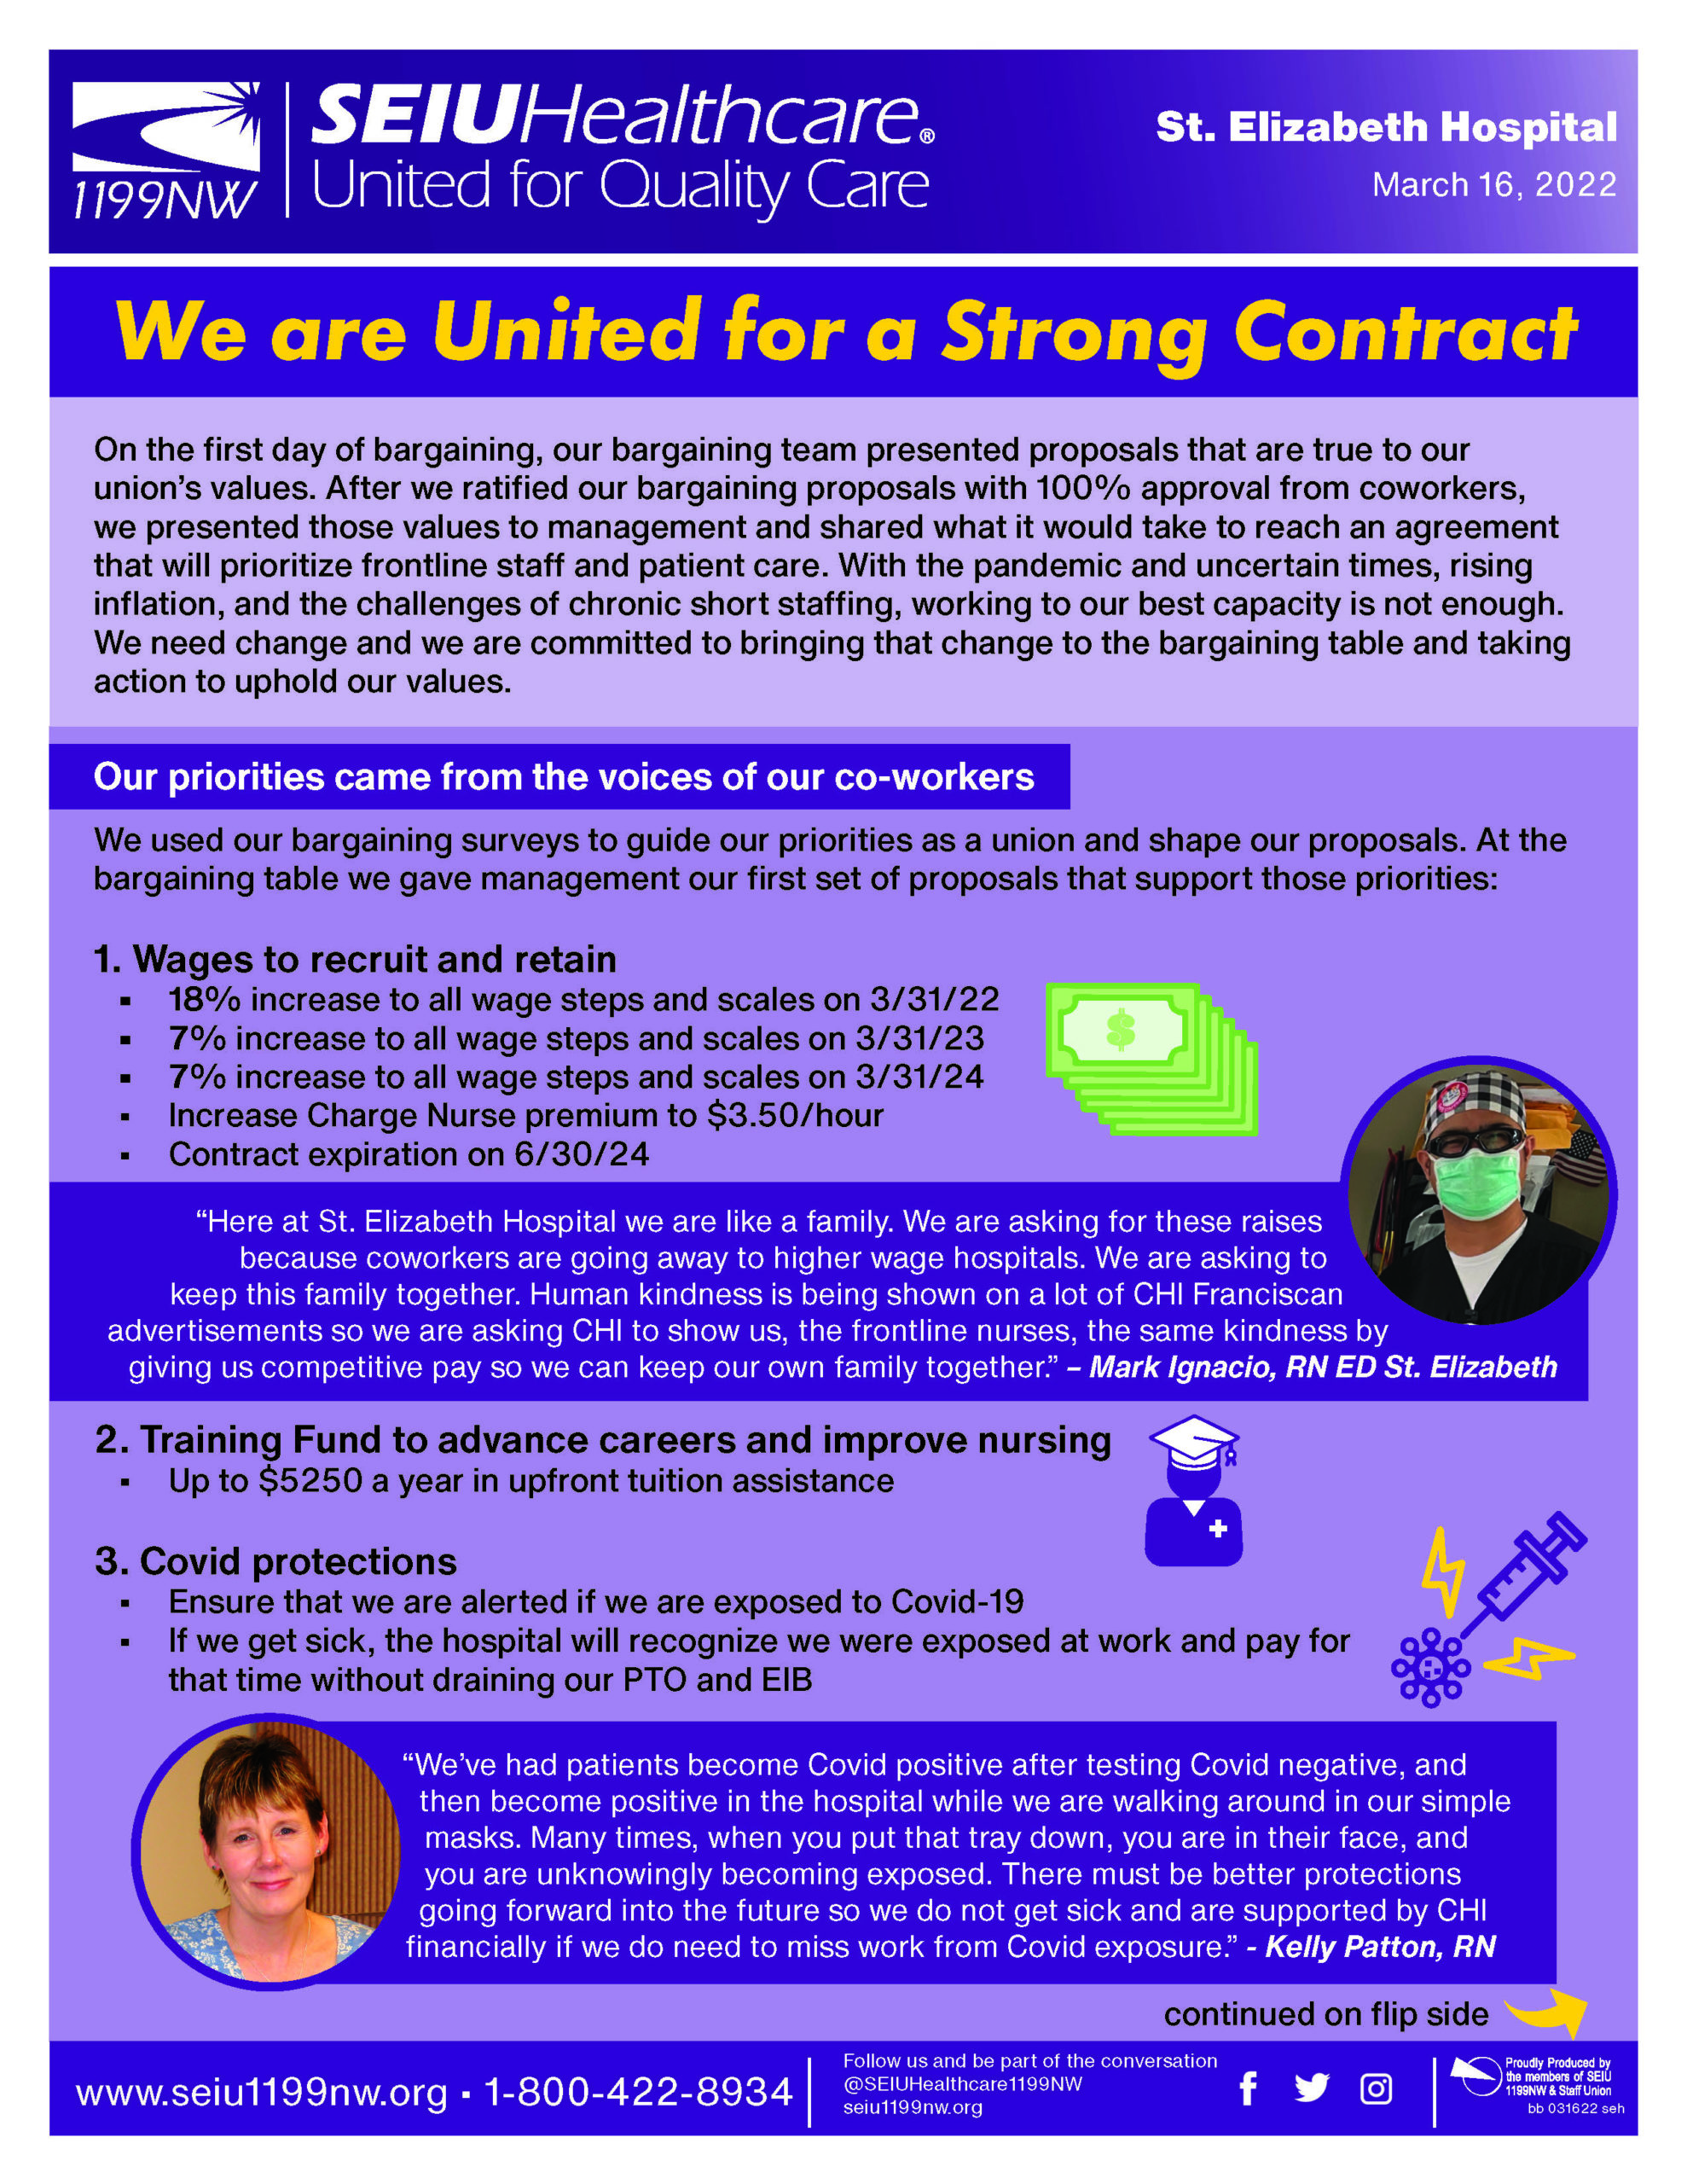 We are United for a Strong Contract